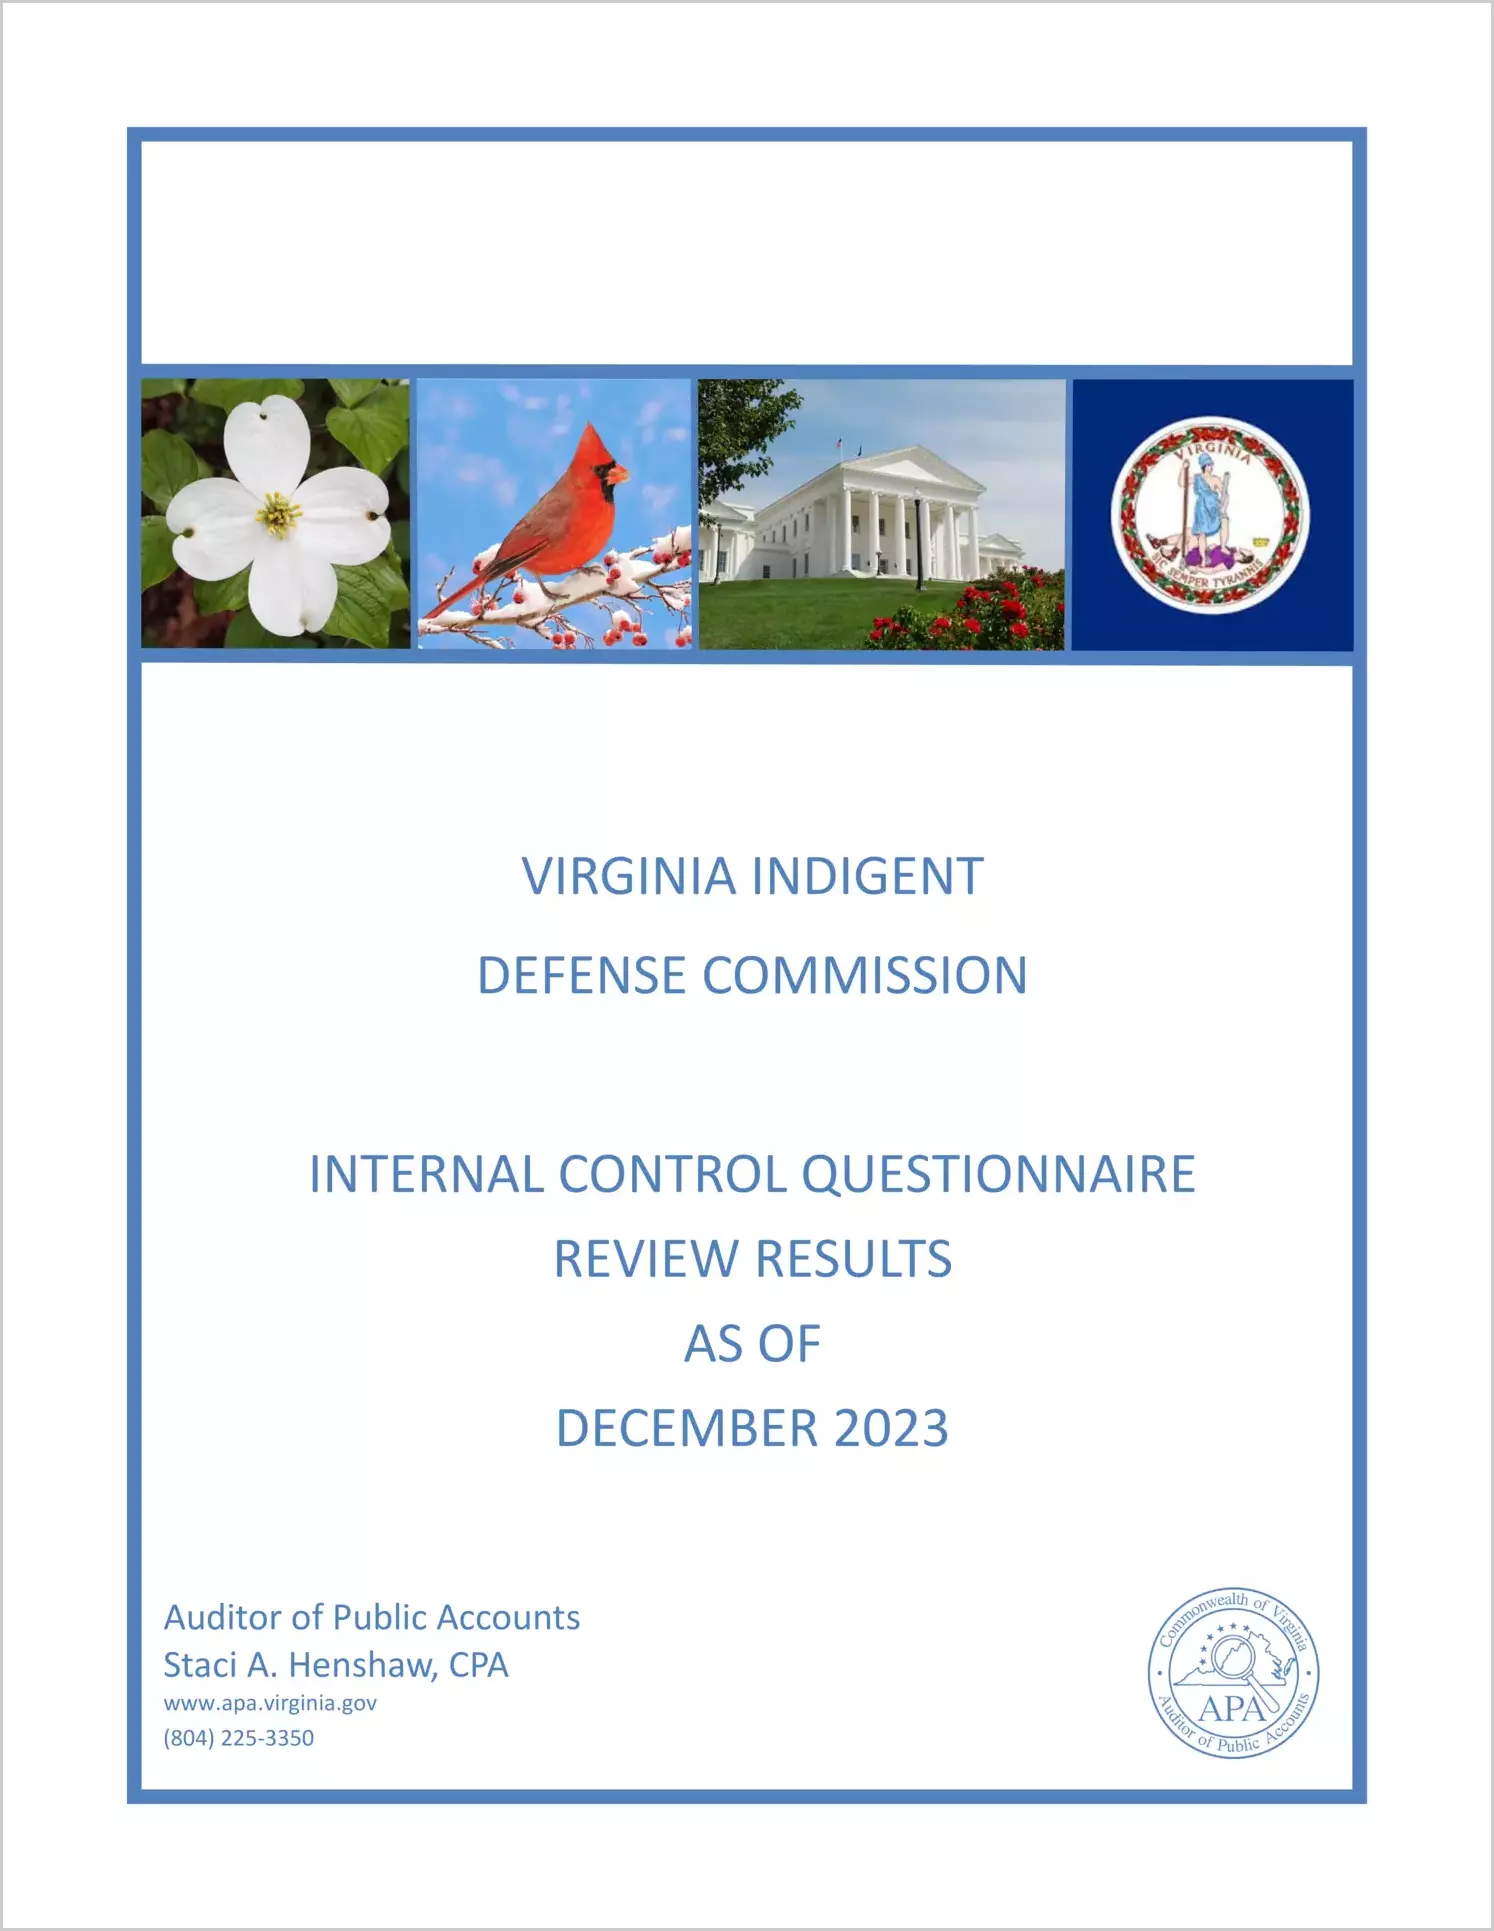 Virginia Indigent Defense Commission Internal Control Questionnaire Review Results as of December 2023